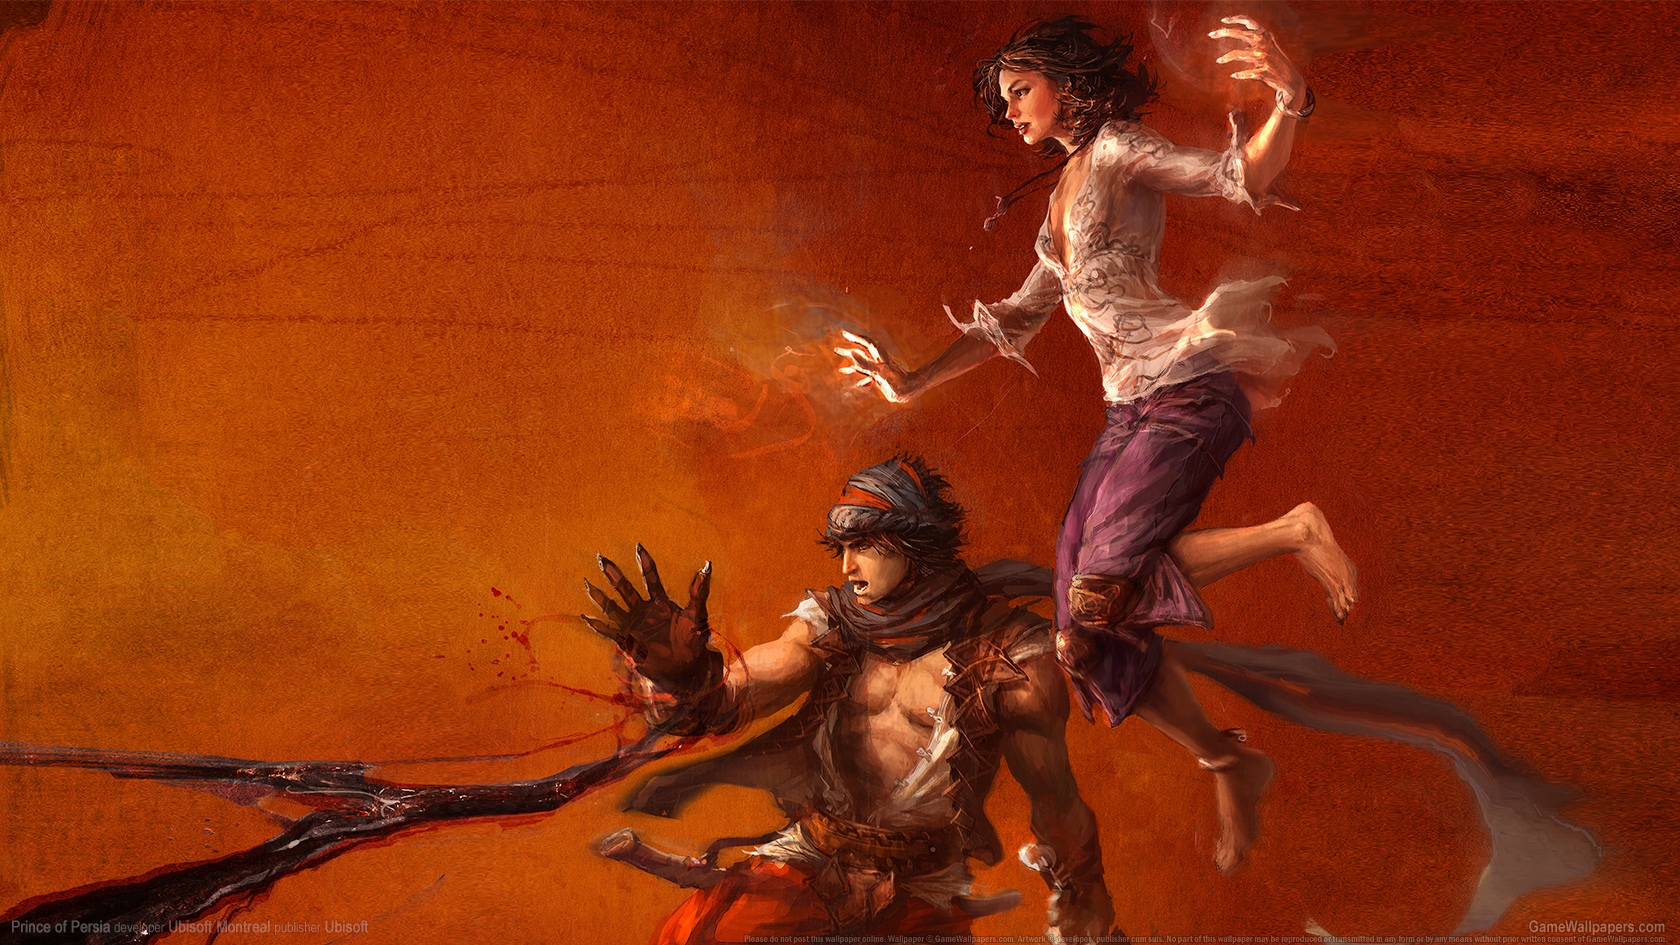 Prince of Persia 1680x945 achtergrond 07